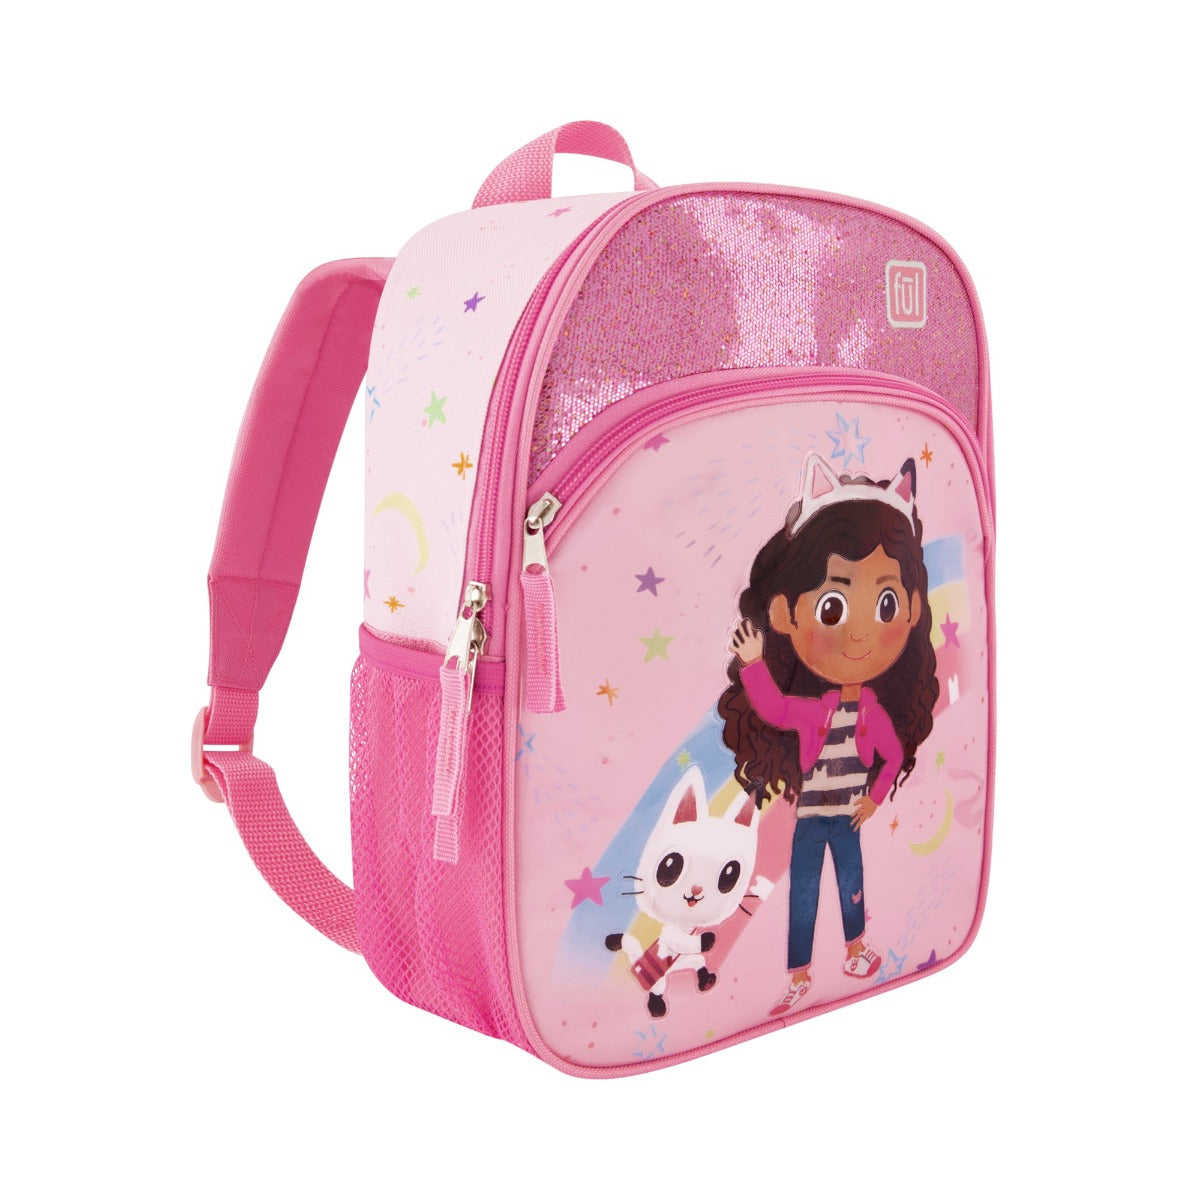 Gabby's Dollhouse sketch your dreams matching 2 piece set - 13" carry-on under seat backpack for kids